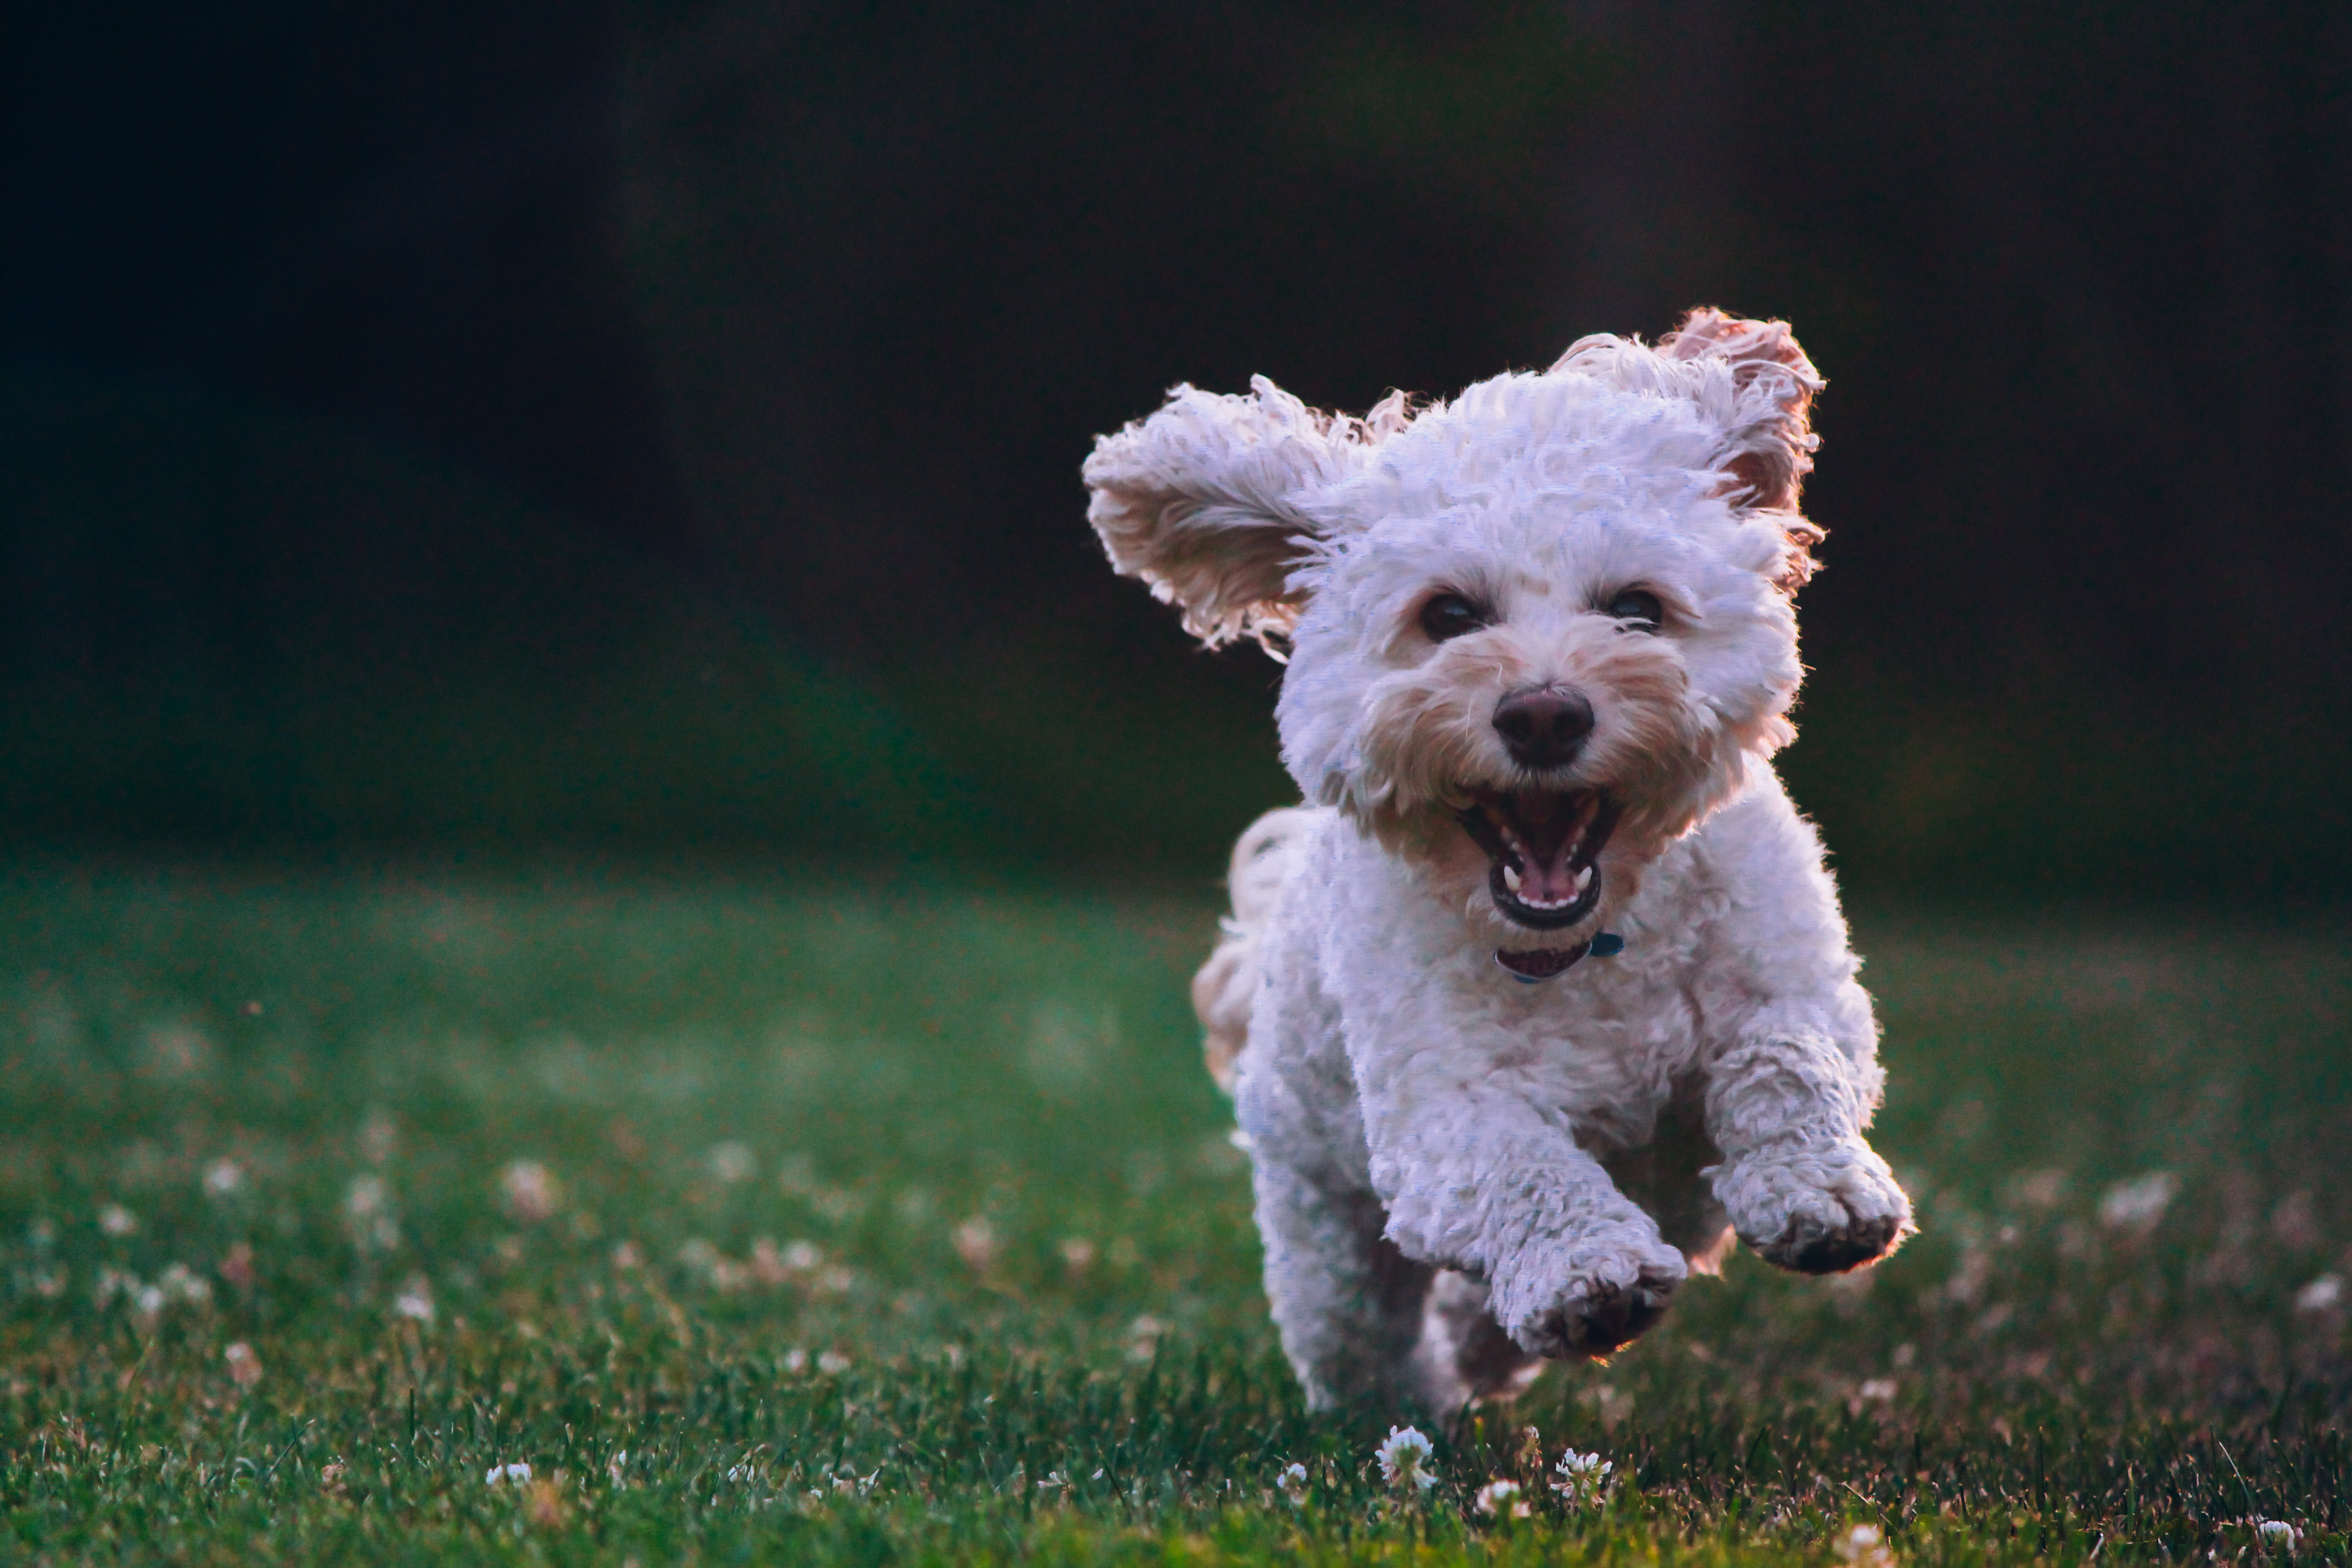 This dog just learned how to use Amazon MSK, look how happy he is!